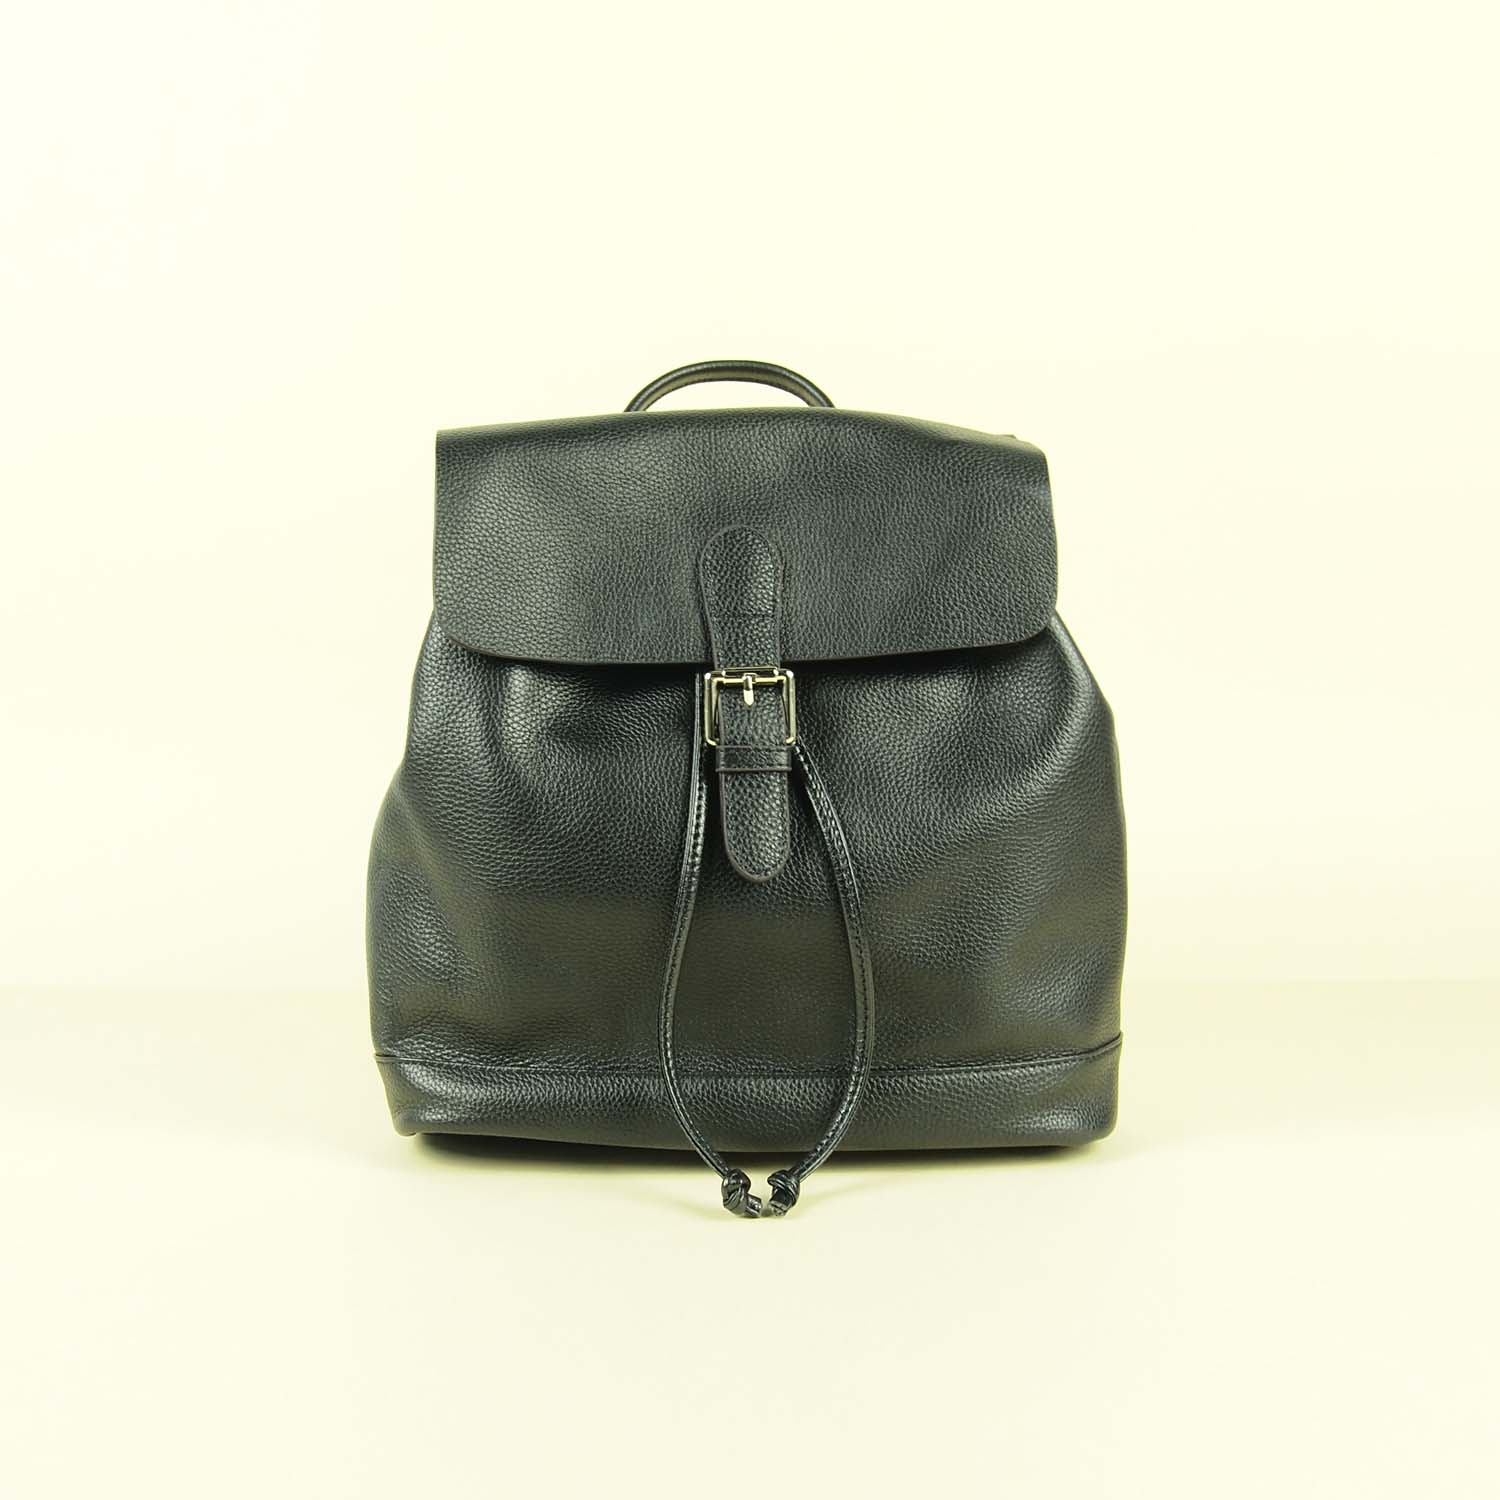 Super Urban Forest Morgan Backpack Front View